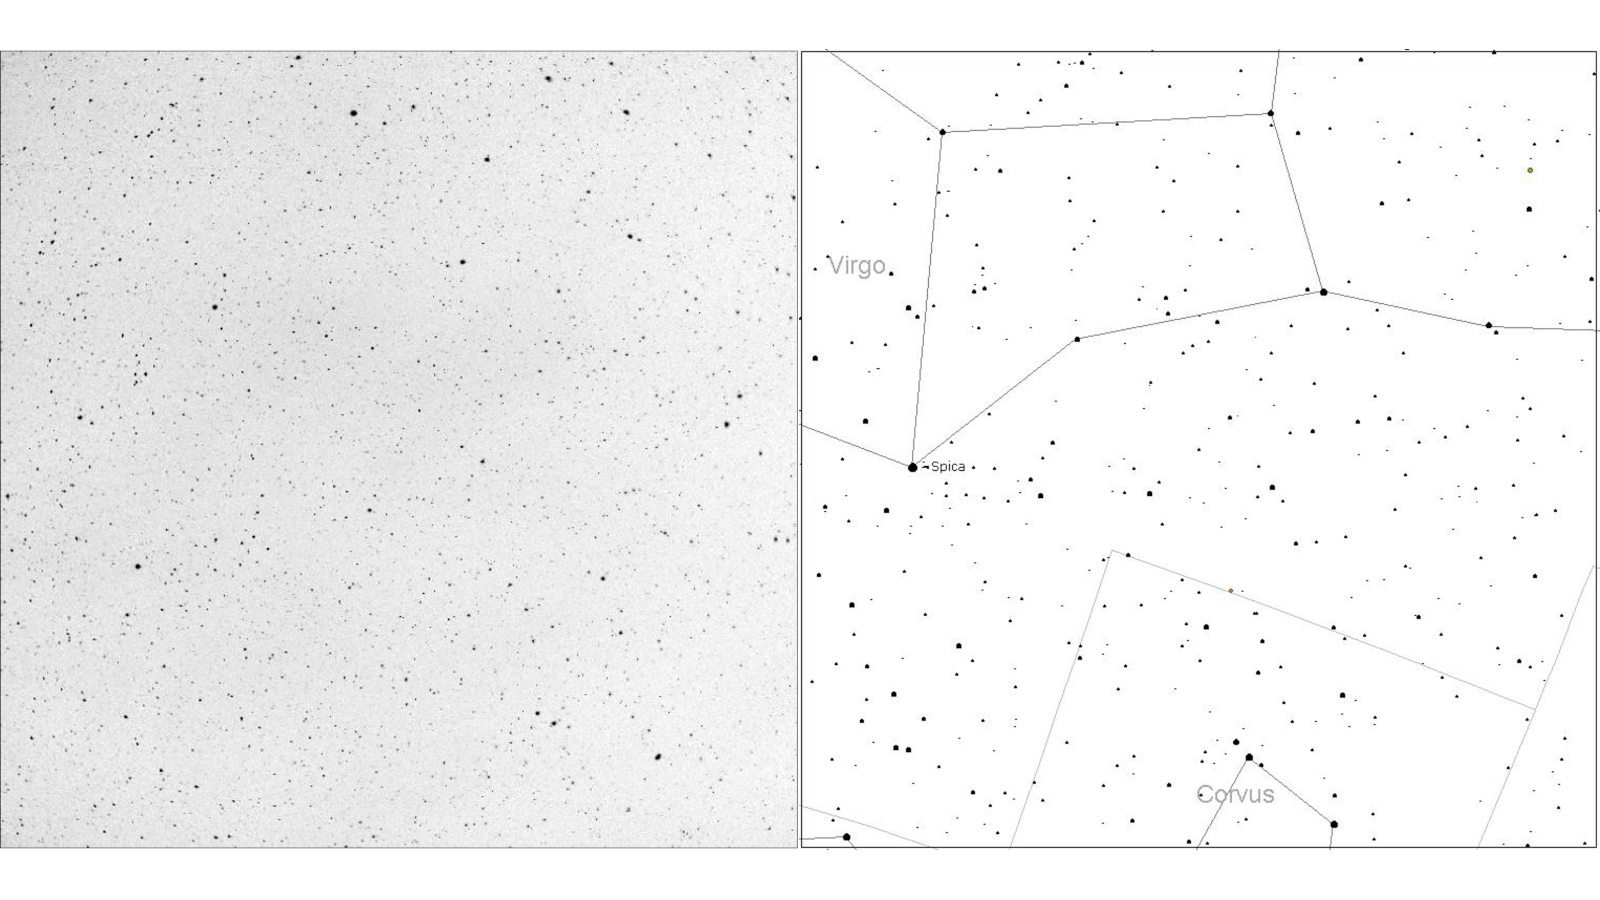 KELT image of a region of the Virgo and Corvus constellations (left) and a sky map of the same regio (right)